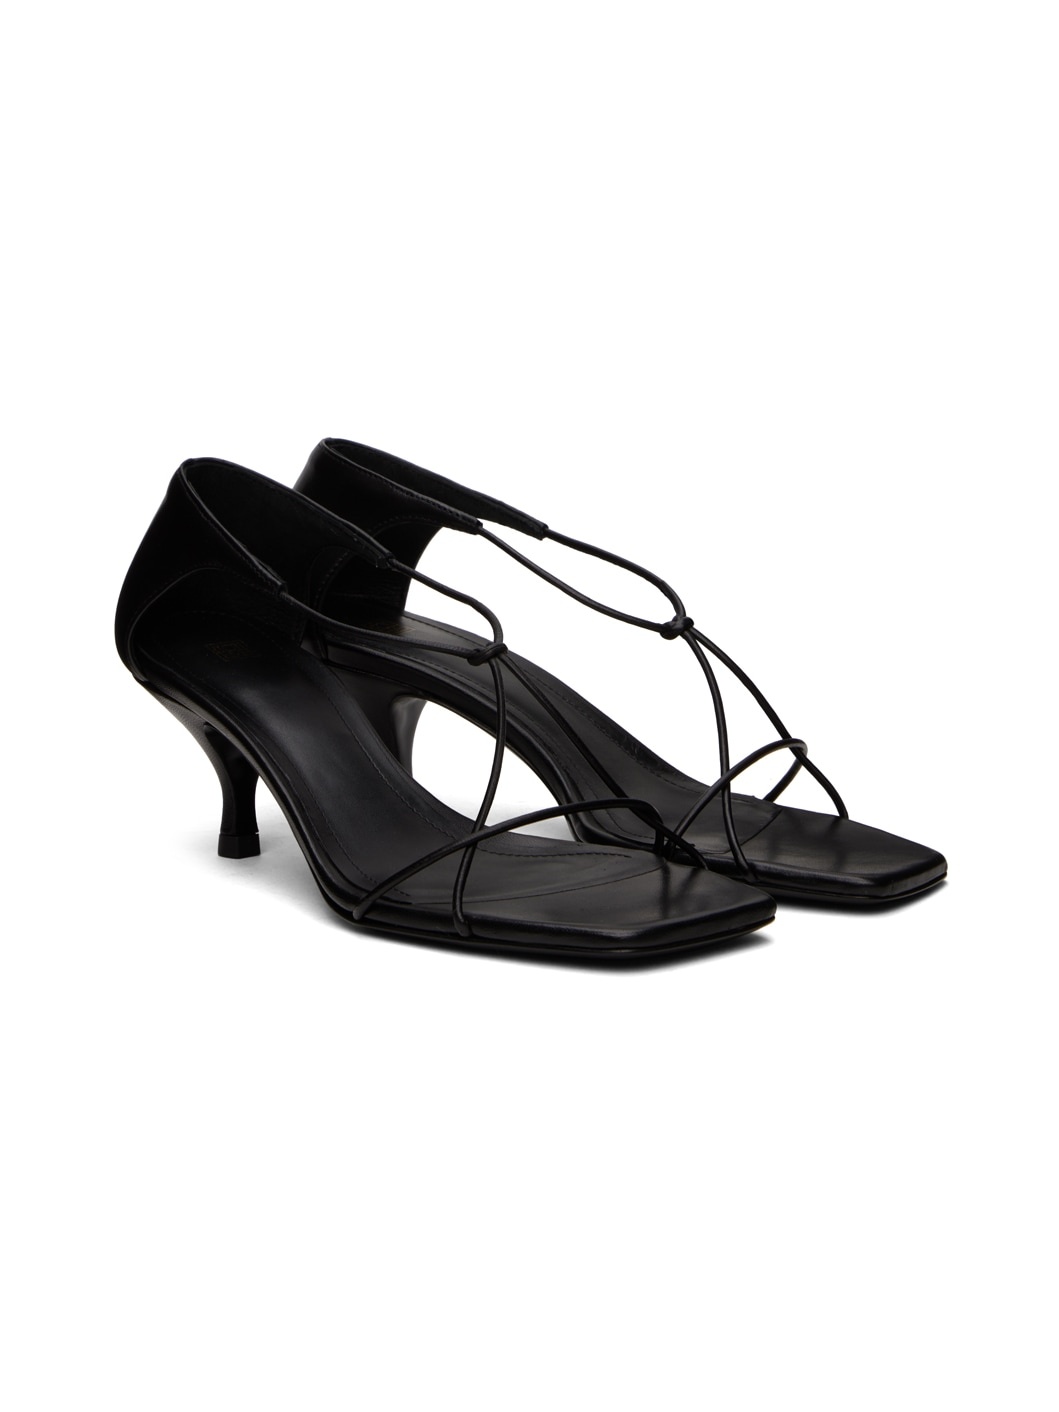 Black 'The Leather Knot' Heeled Sandals - 4